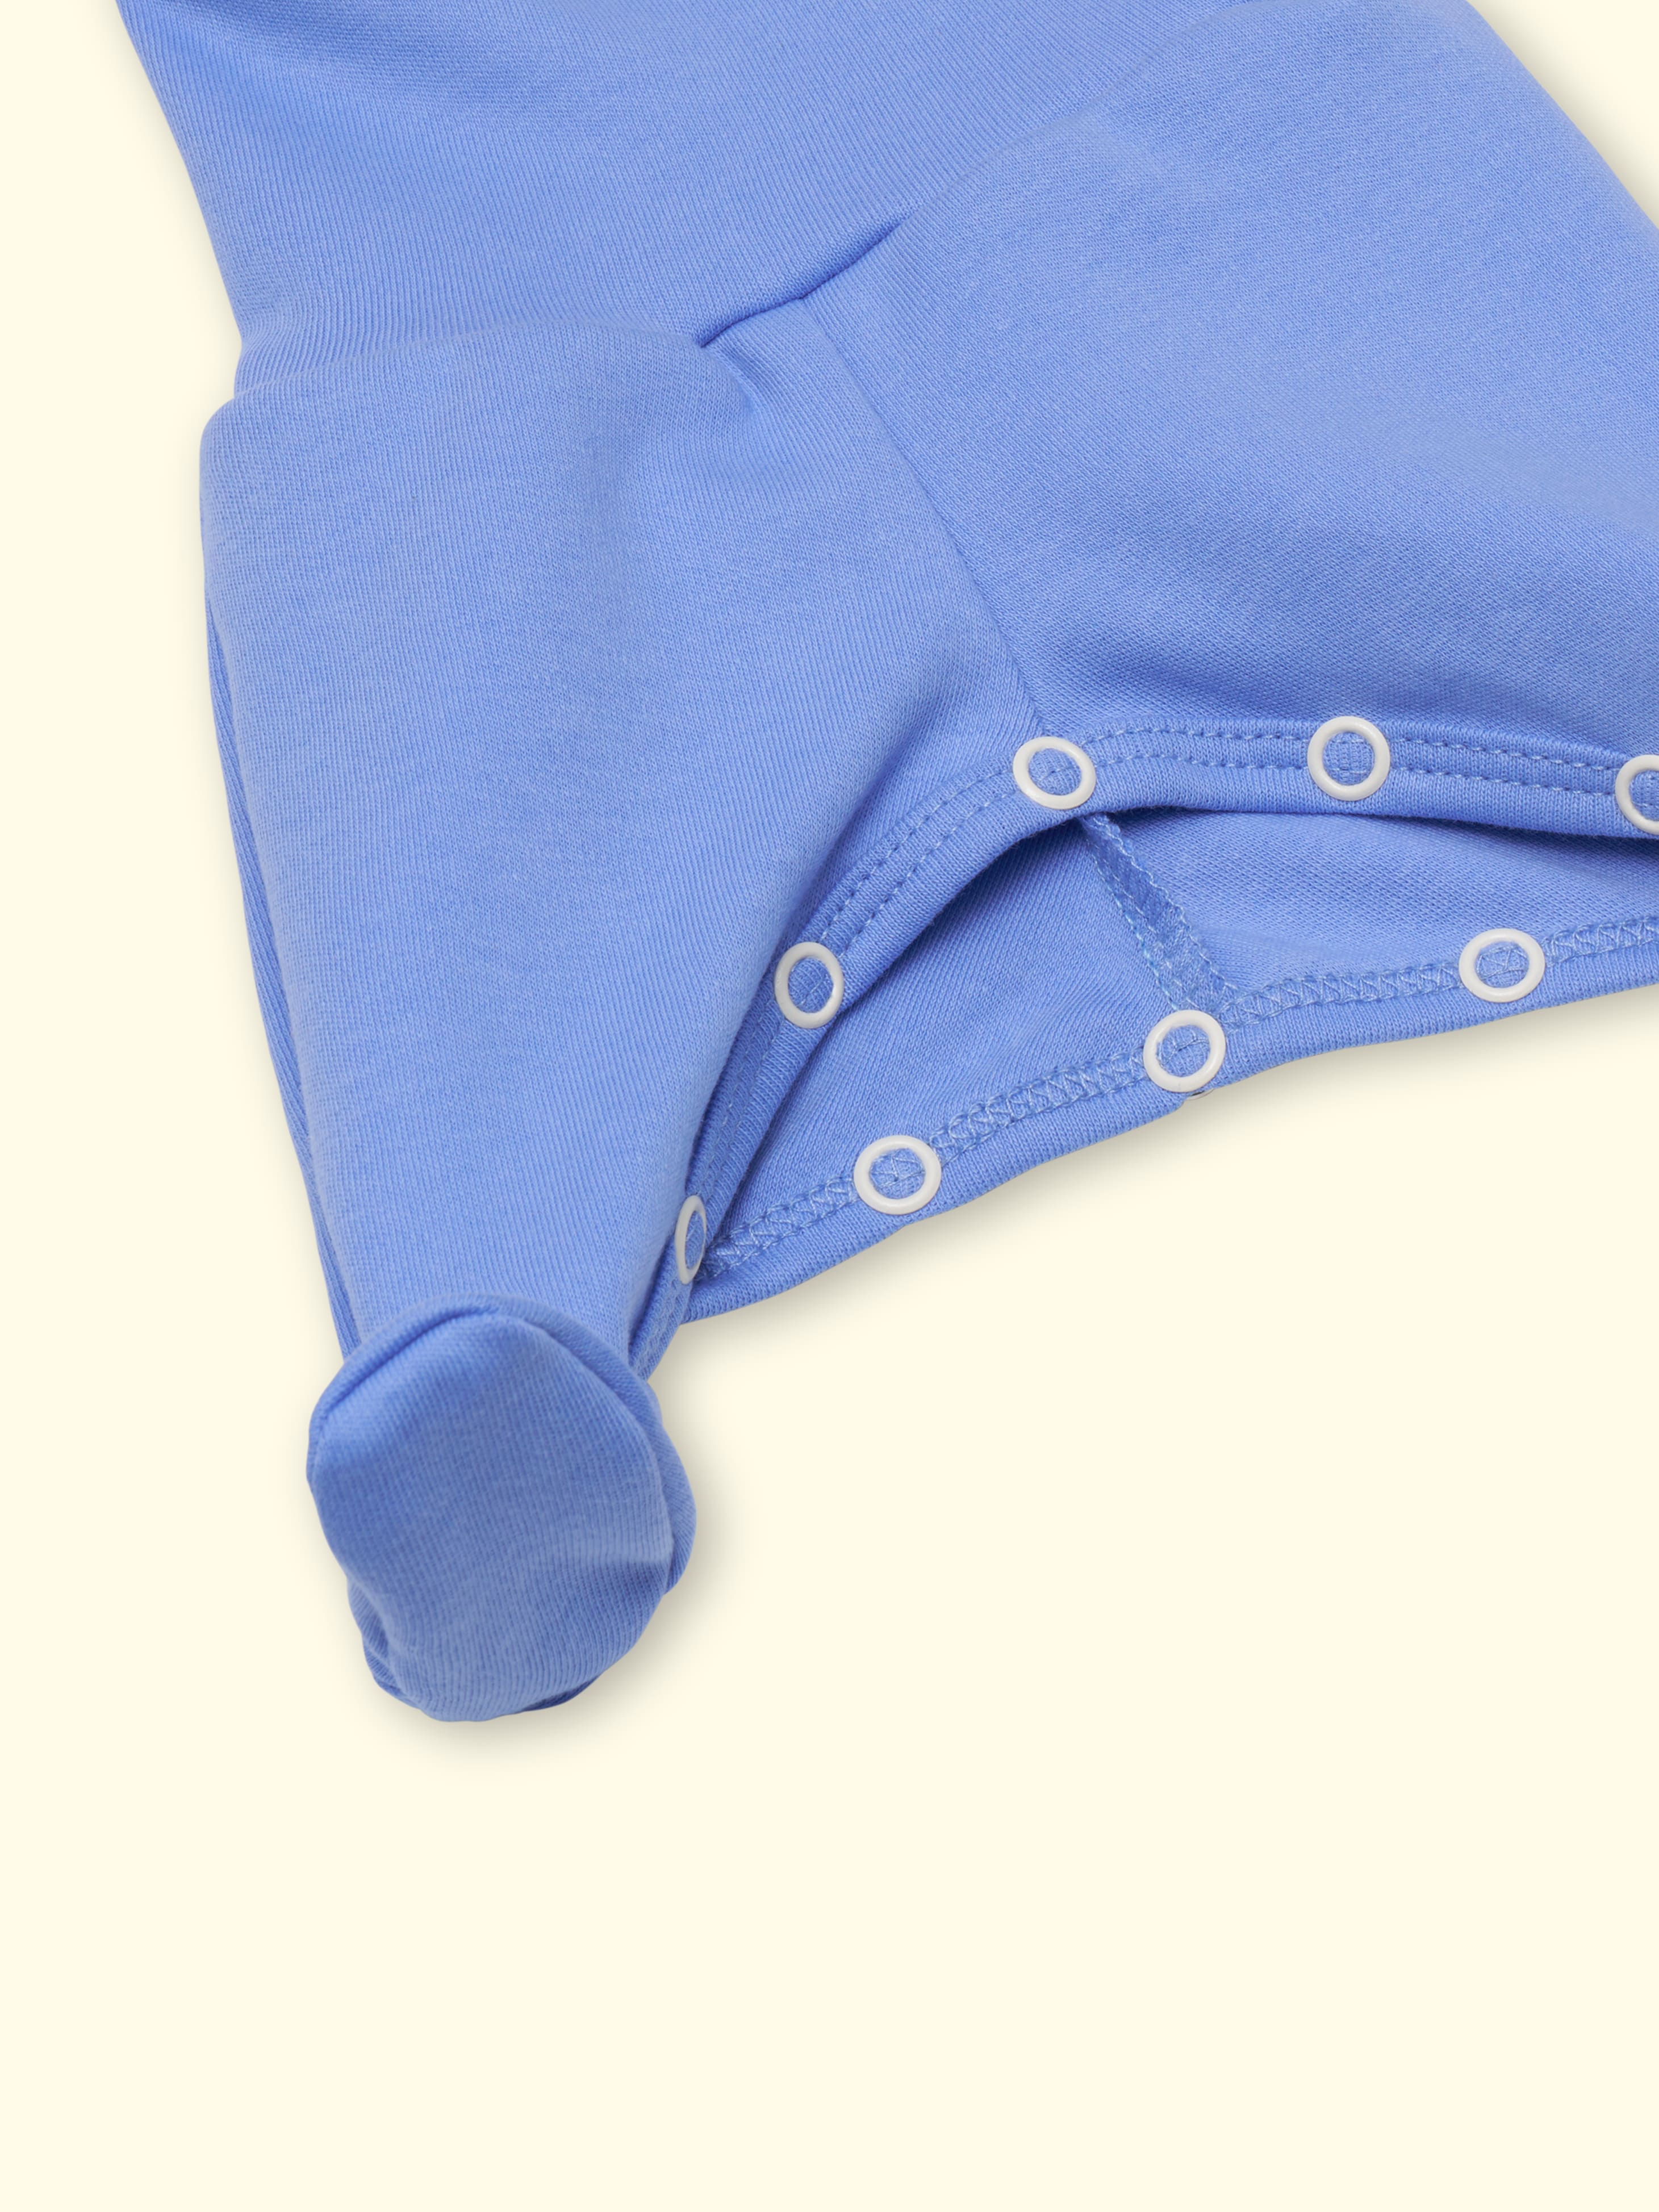 NEW - Premature baby pants Momo - made of jersey with press studs